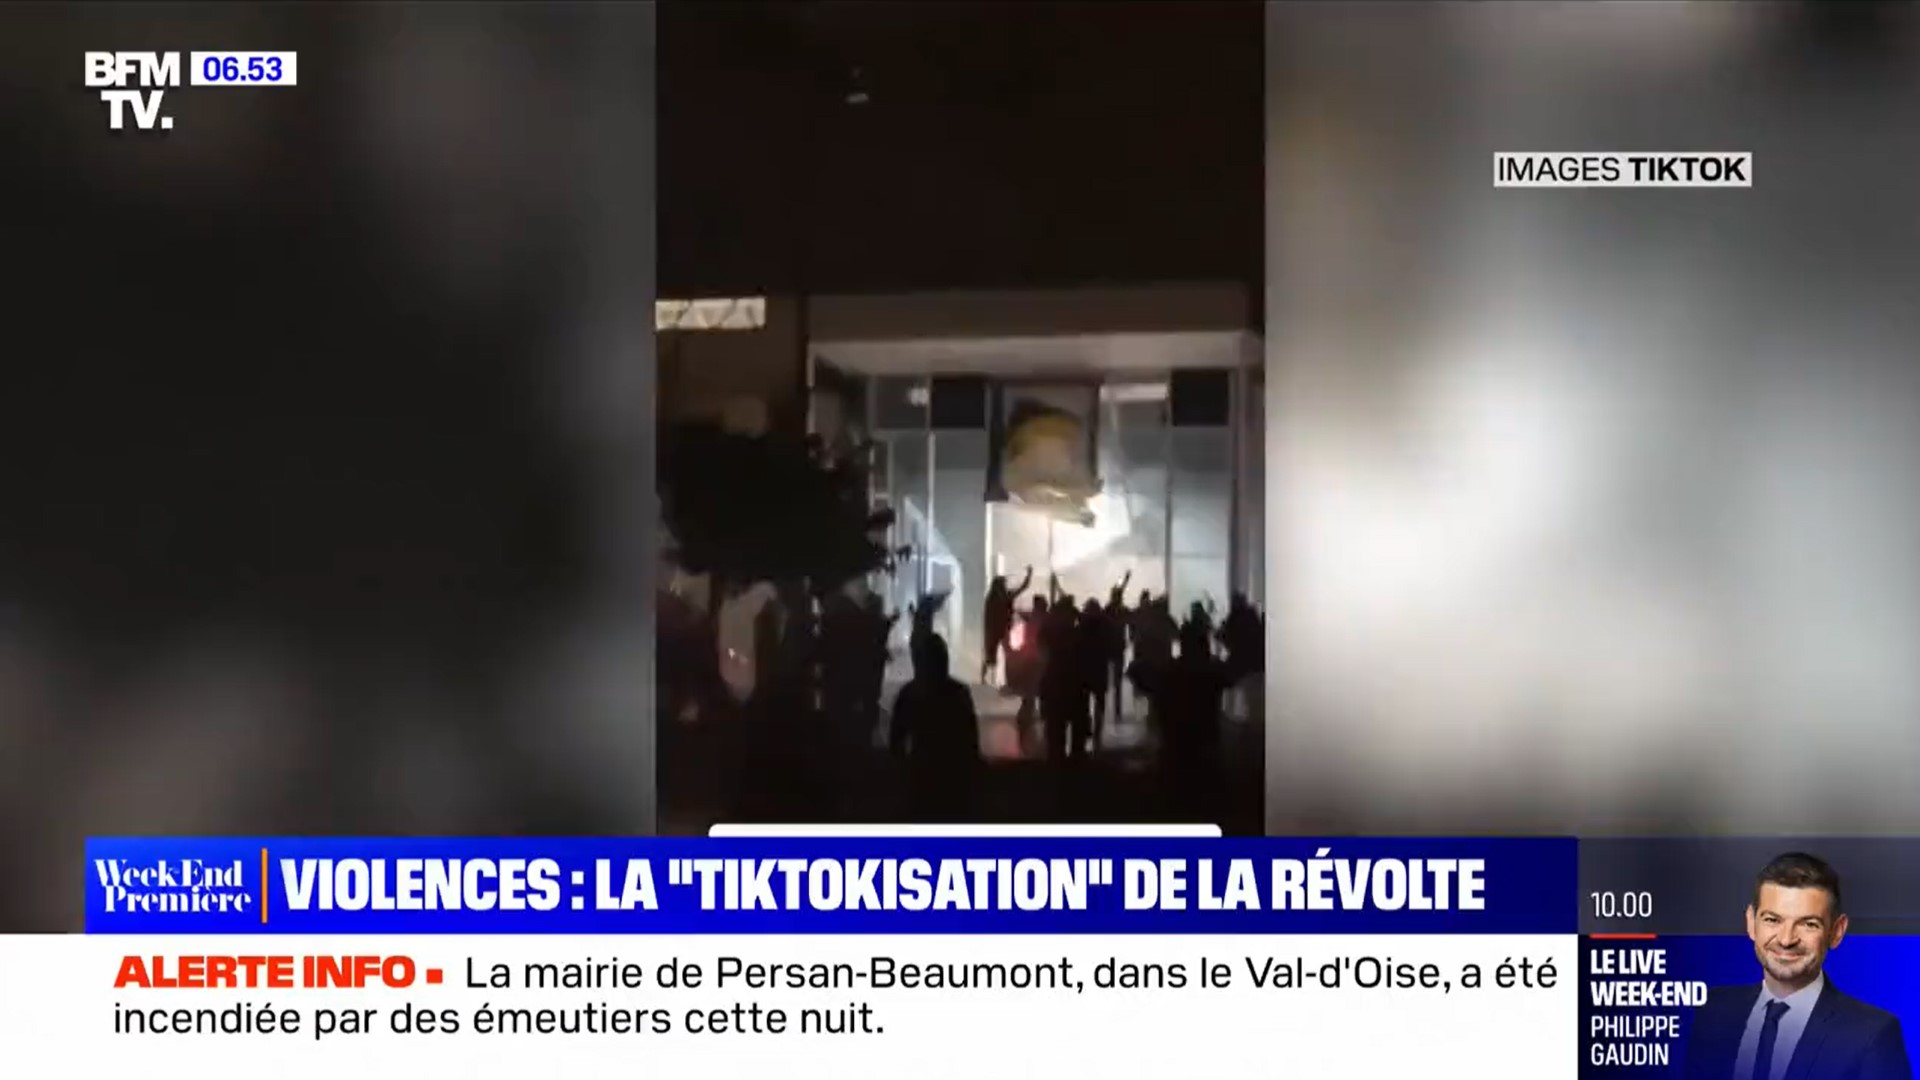 Gérald Darmanin and Jean-Noël Barrot met with representatives from Snapchat, TikTok, Meta, and Twitter.  The government asks them to remove violent content